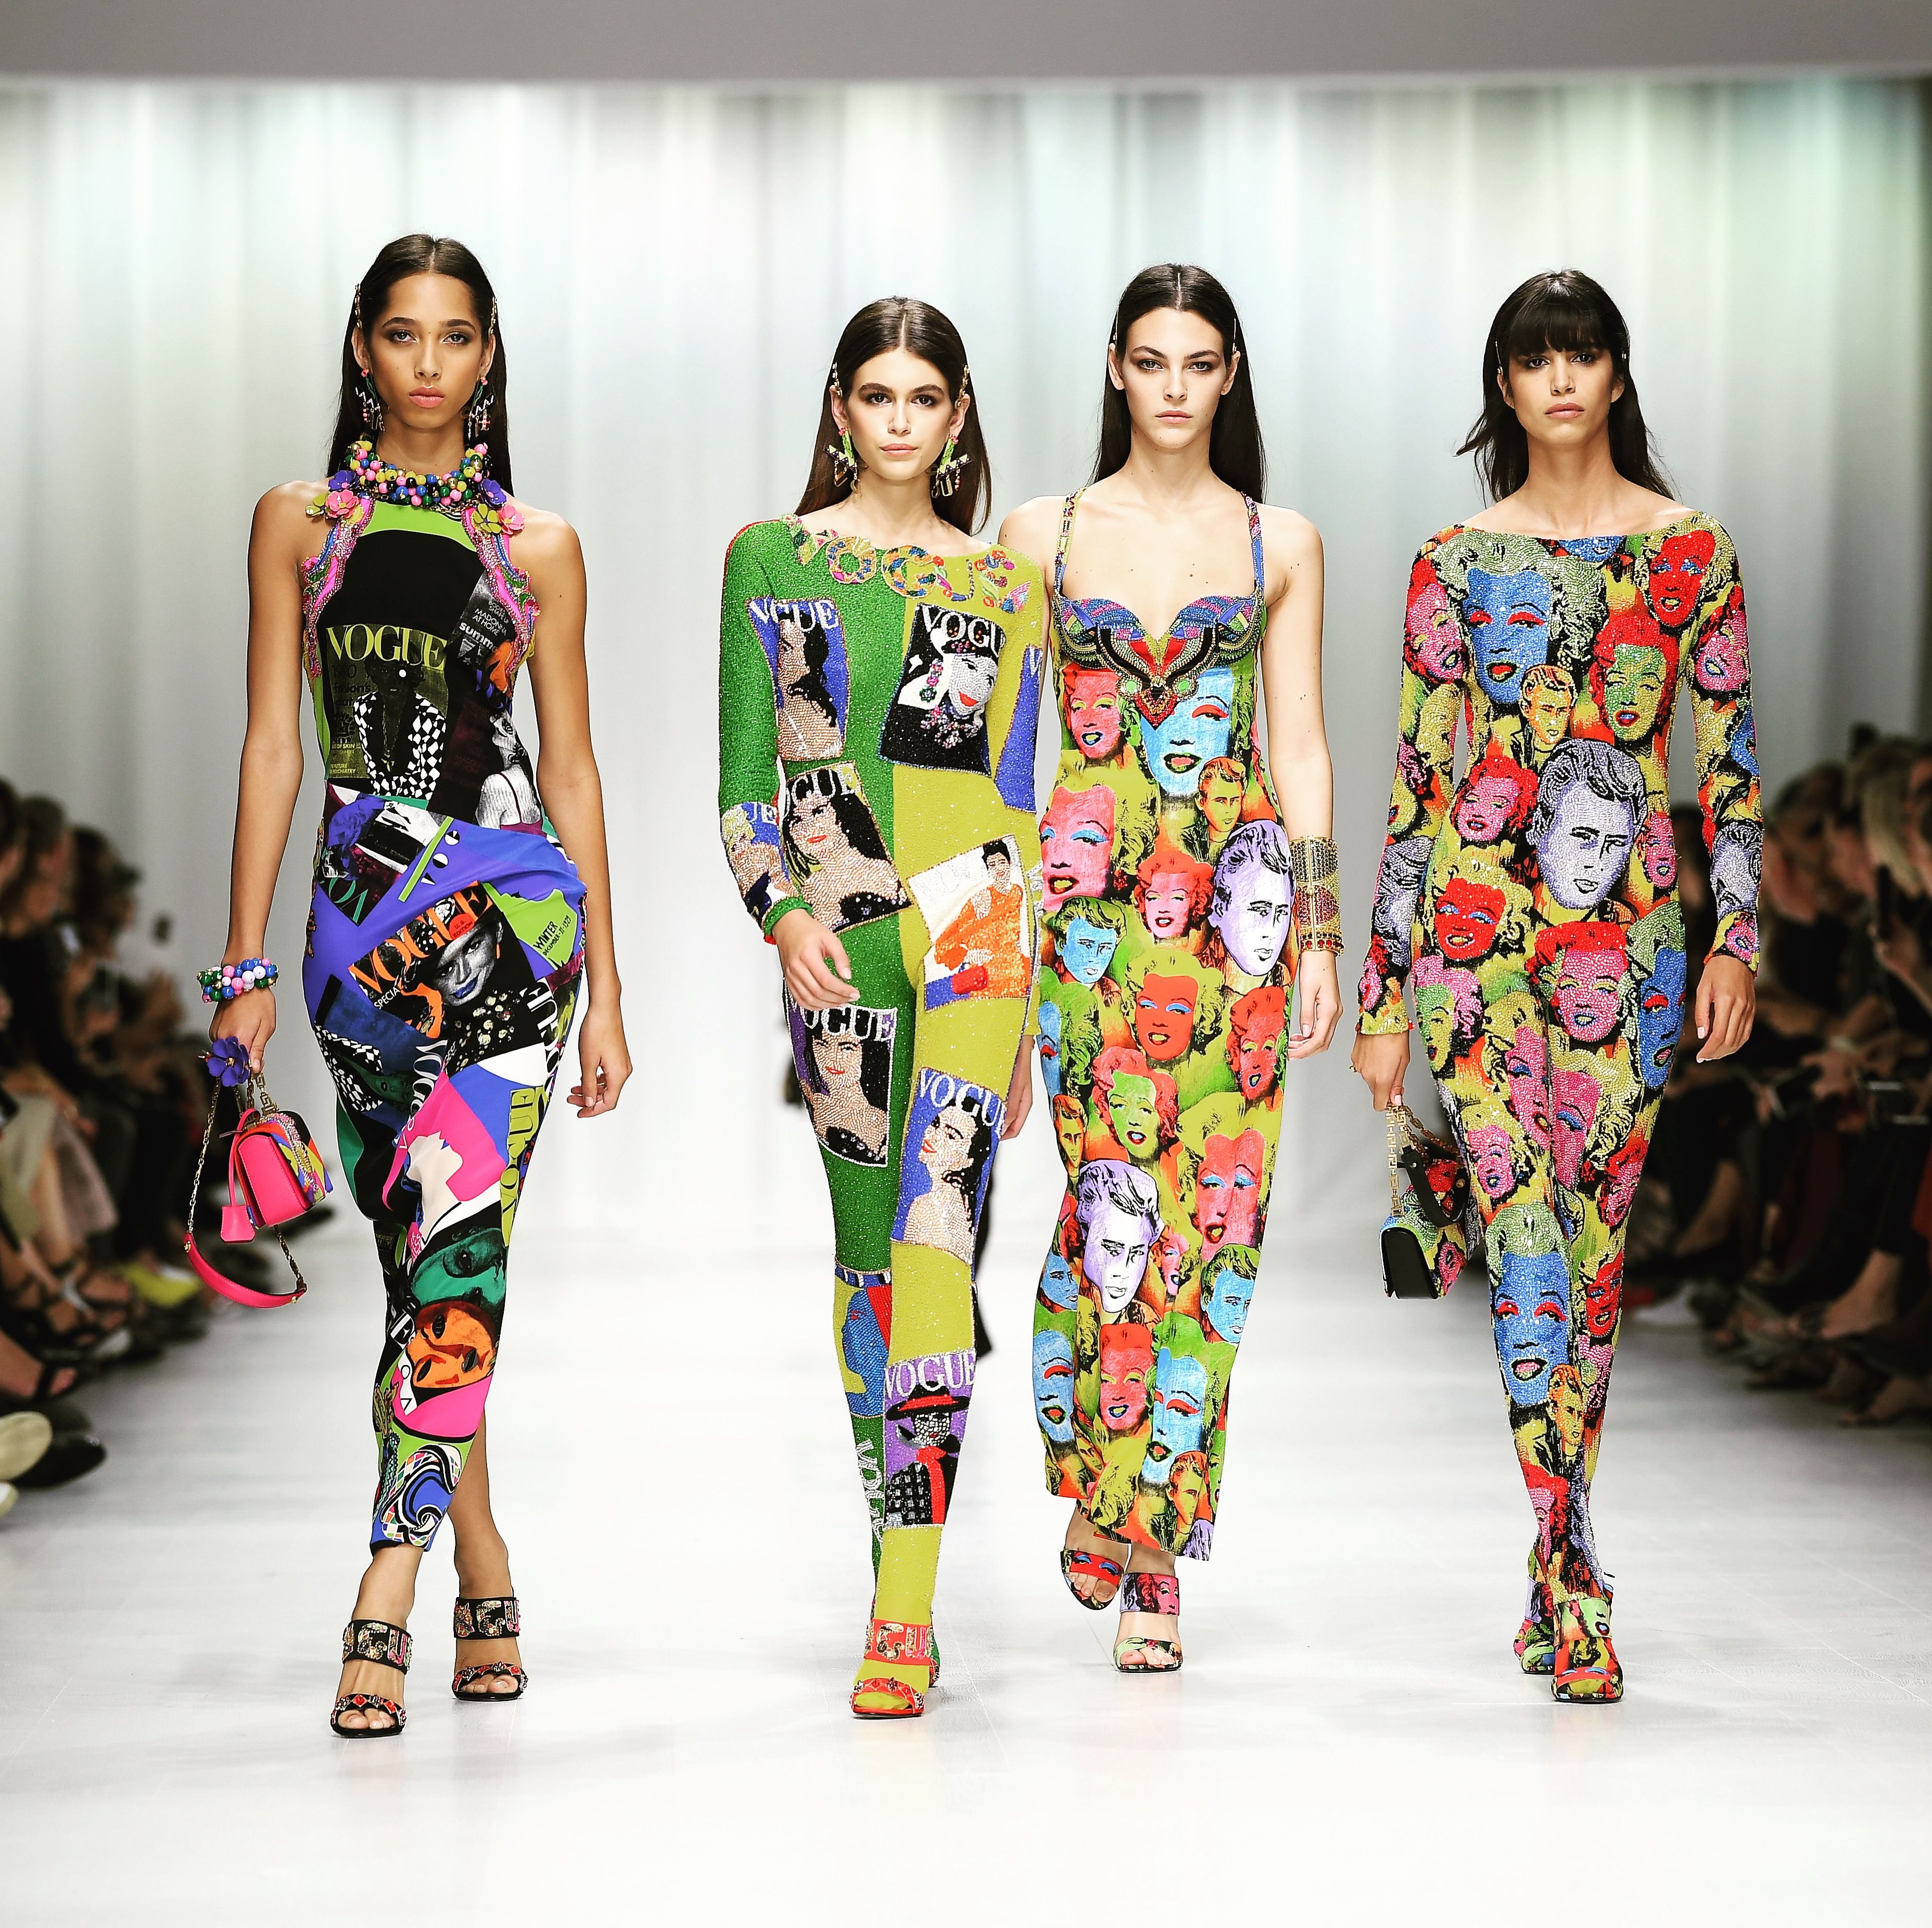 gianni versace designs style